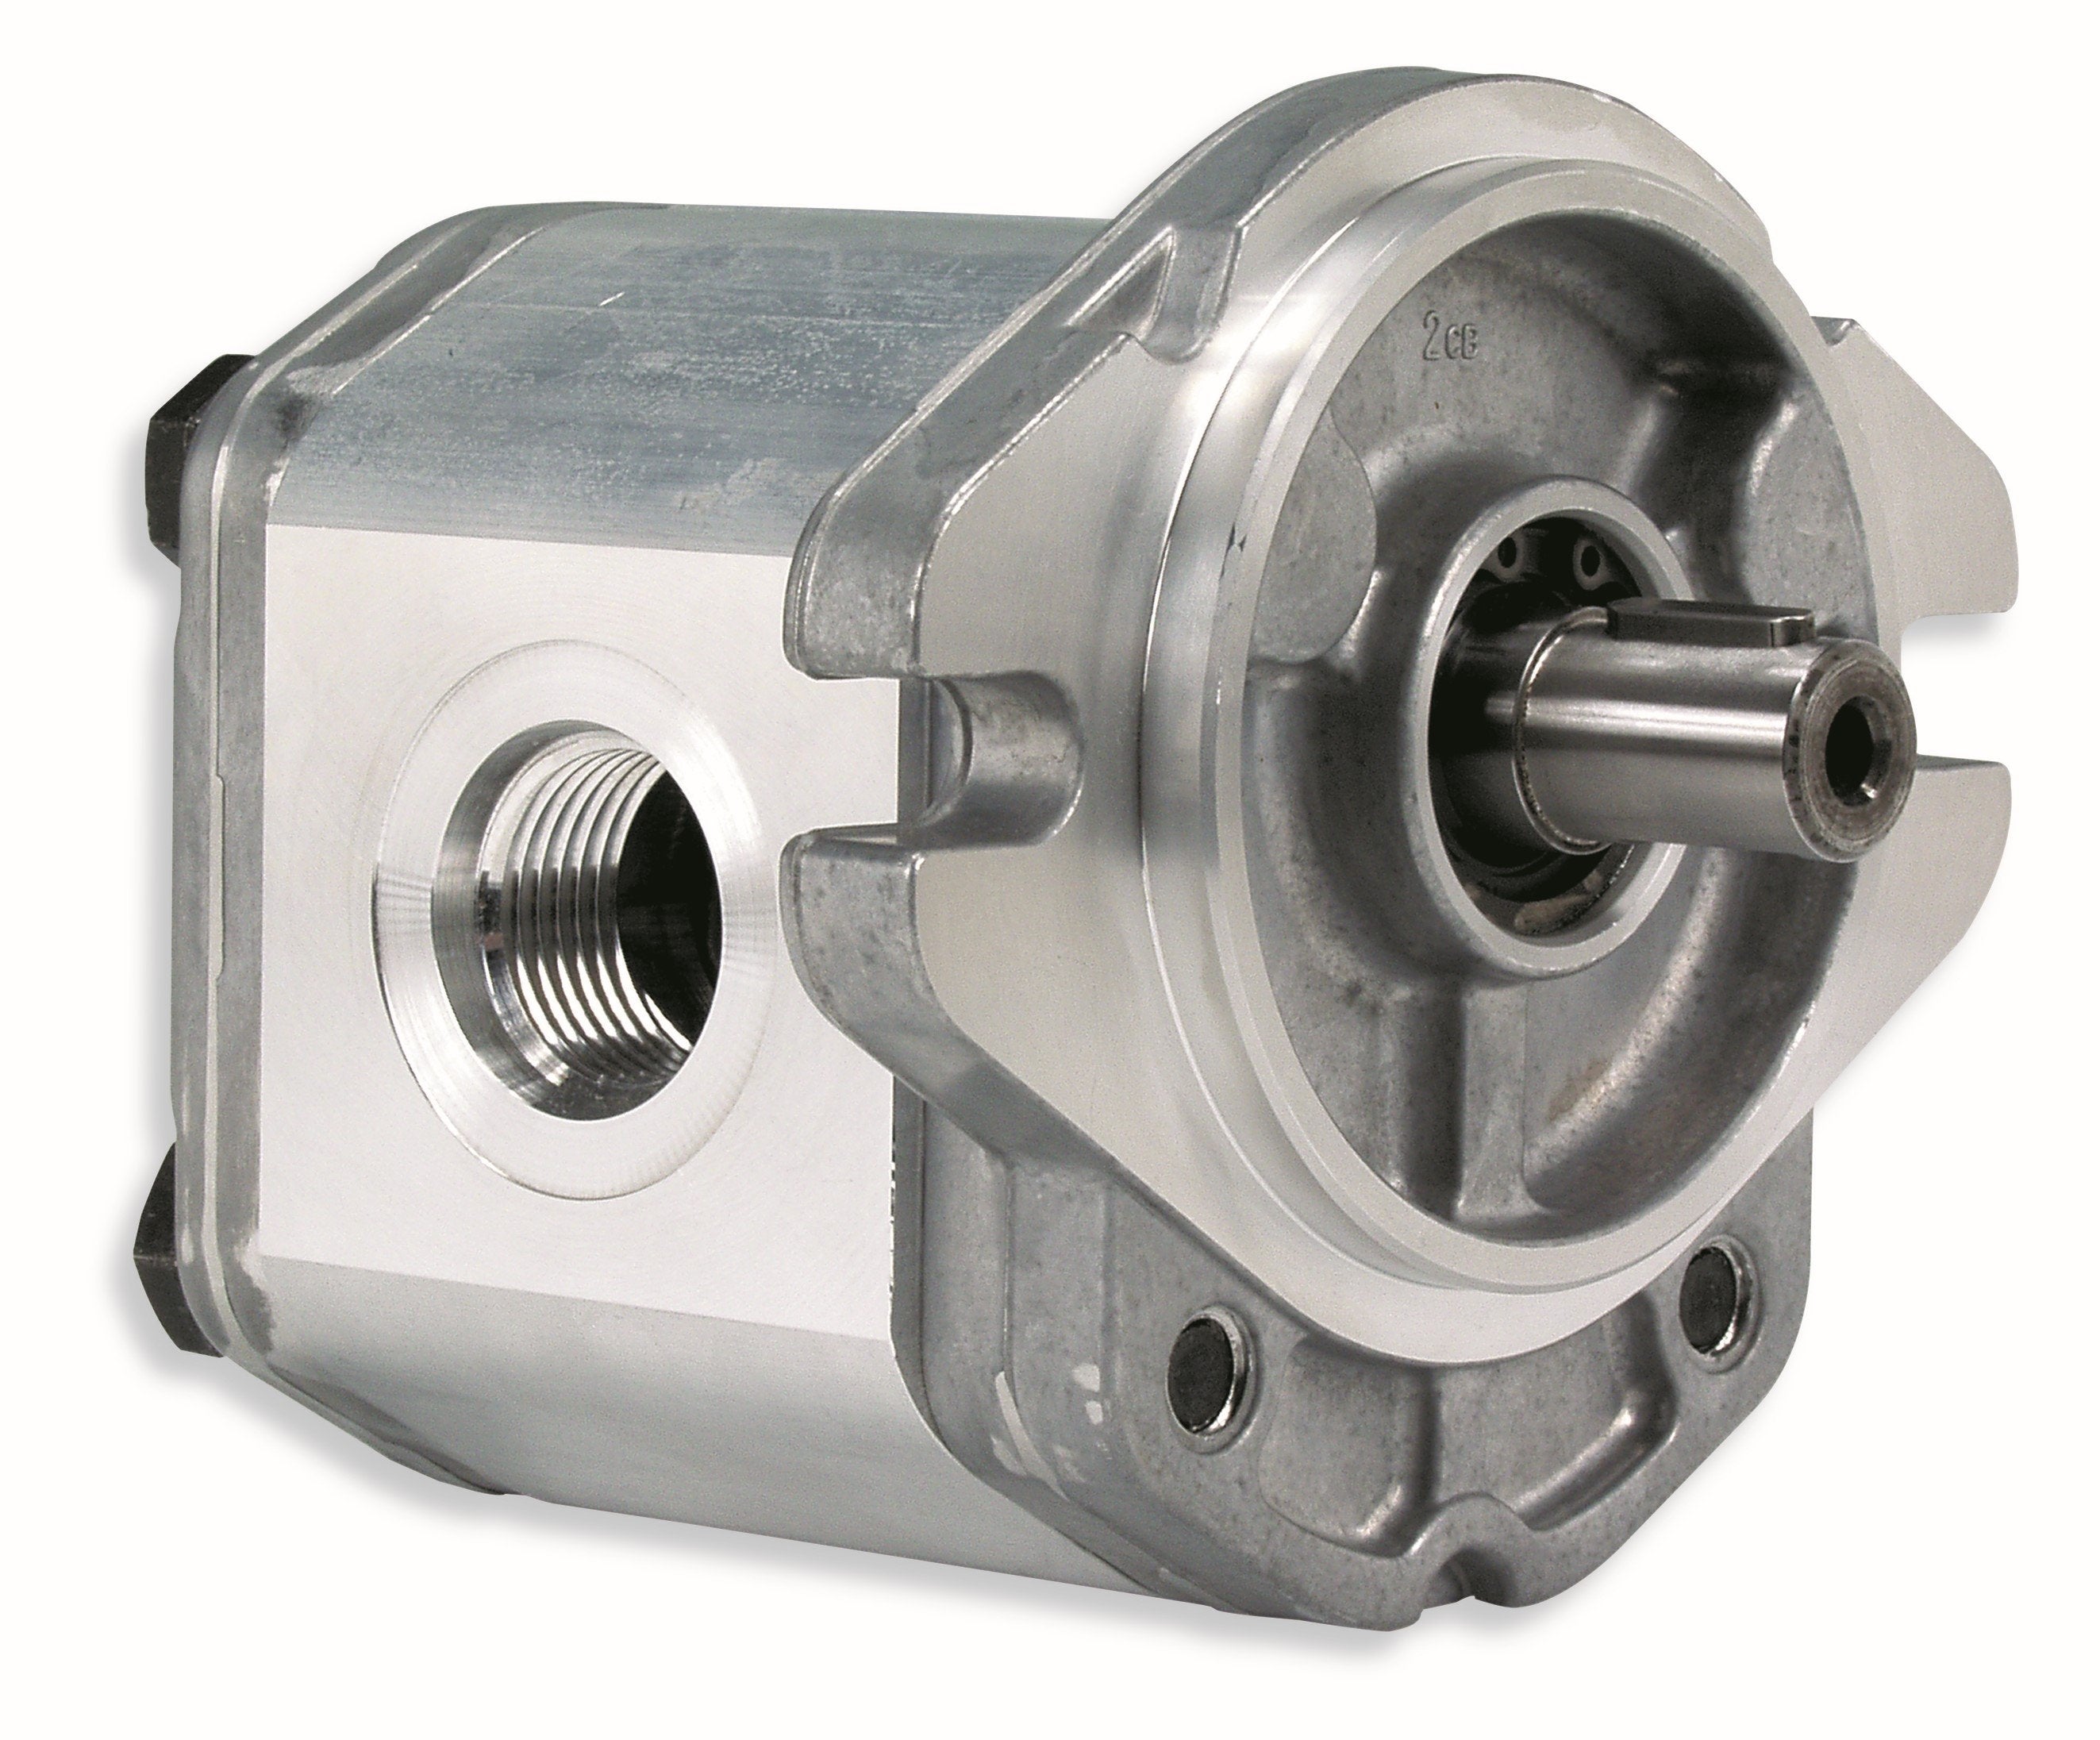 GHM1A-R-7-S1-E2 : Marzocchi Gear Motor, Bidirectional, 5.2cc, 3770psi rated, 3500RPM, 0.5 (1/2") #8 SAE ports, 9T 20/40DP Splined Shaft